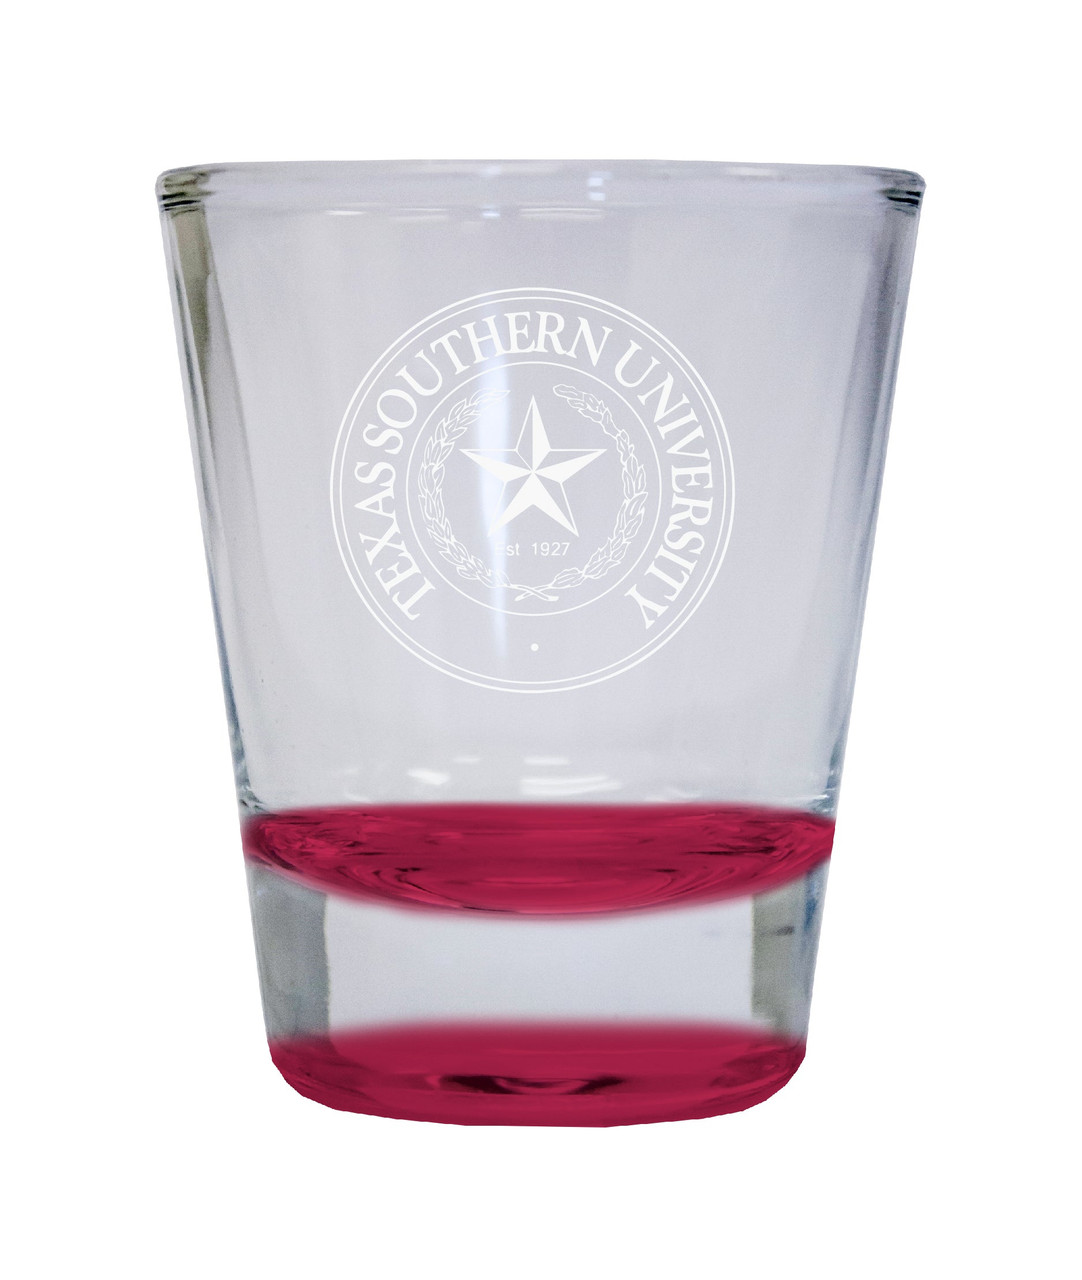 Texas Southern University Etched Round Shot Glass 2 oz Red